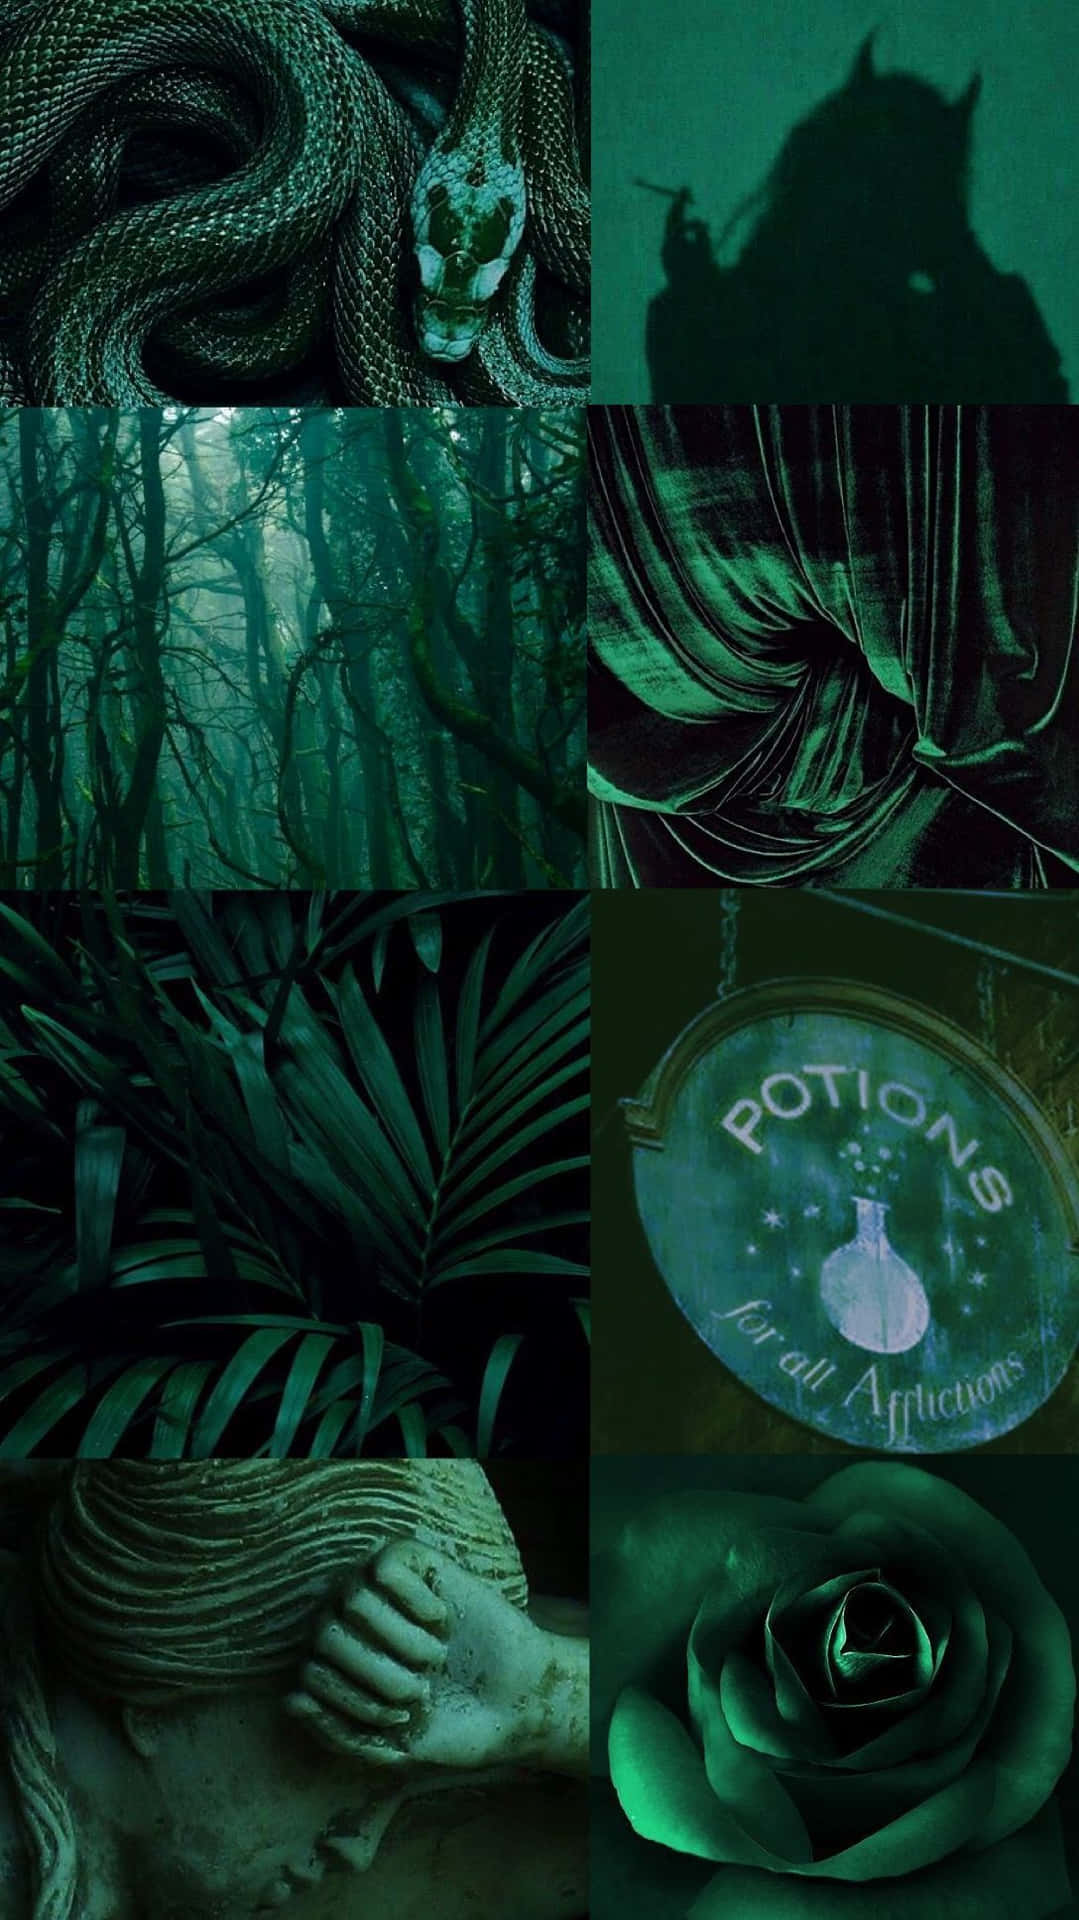 Aesthetic Green Dark Collage Pictures 1088 x 1936 Picture